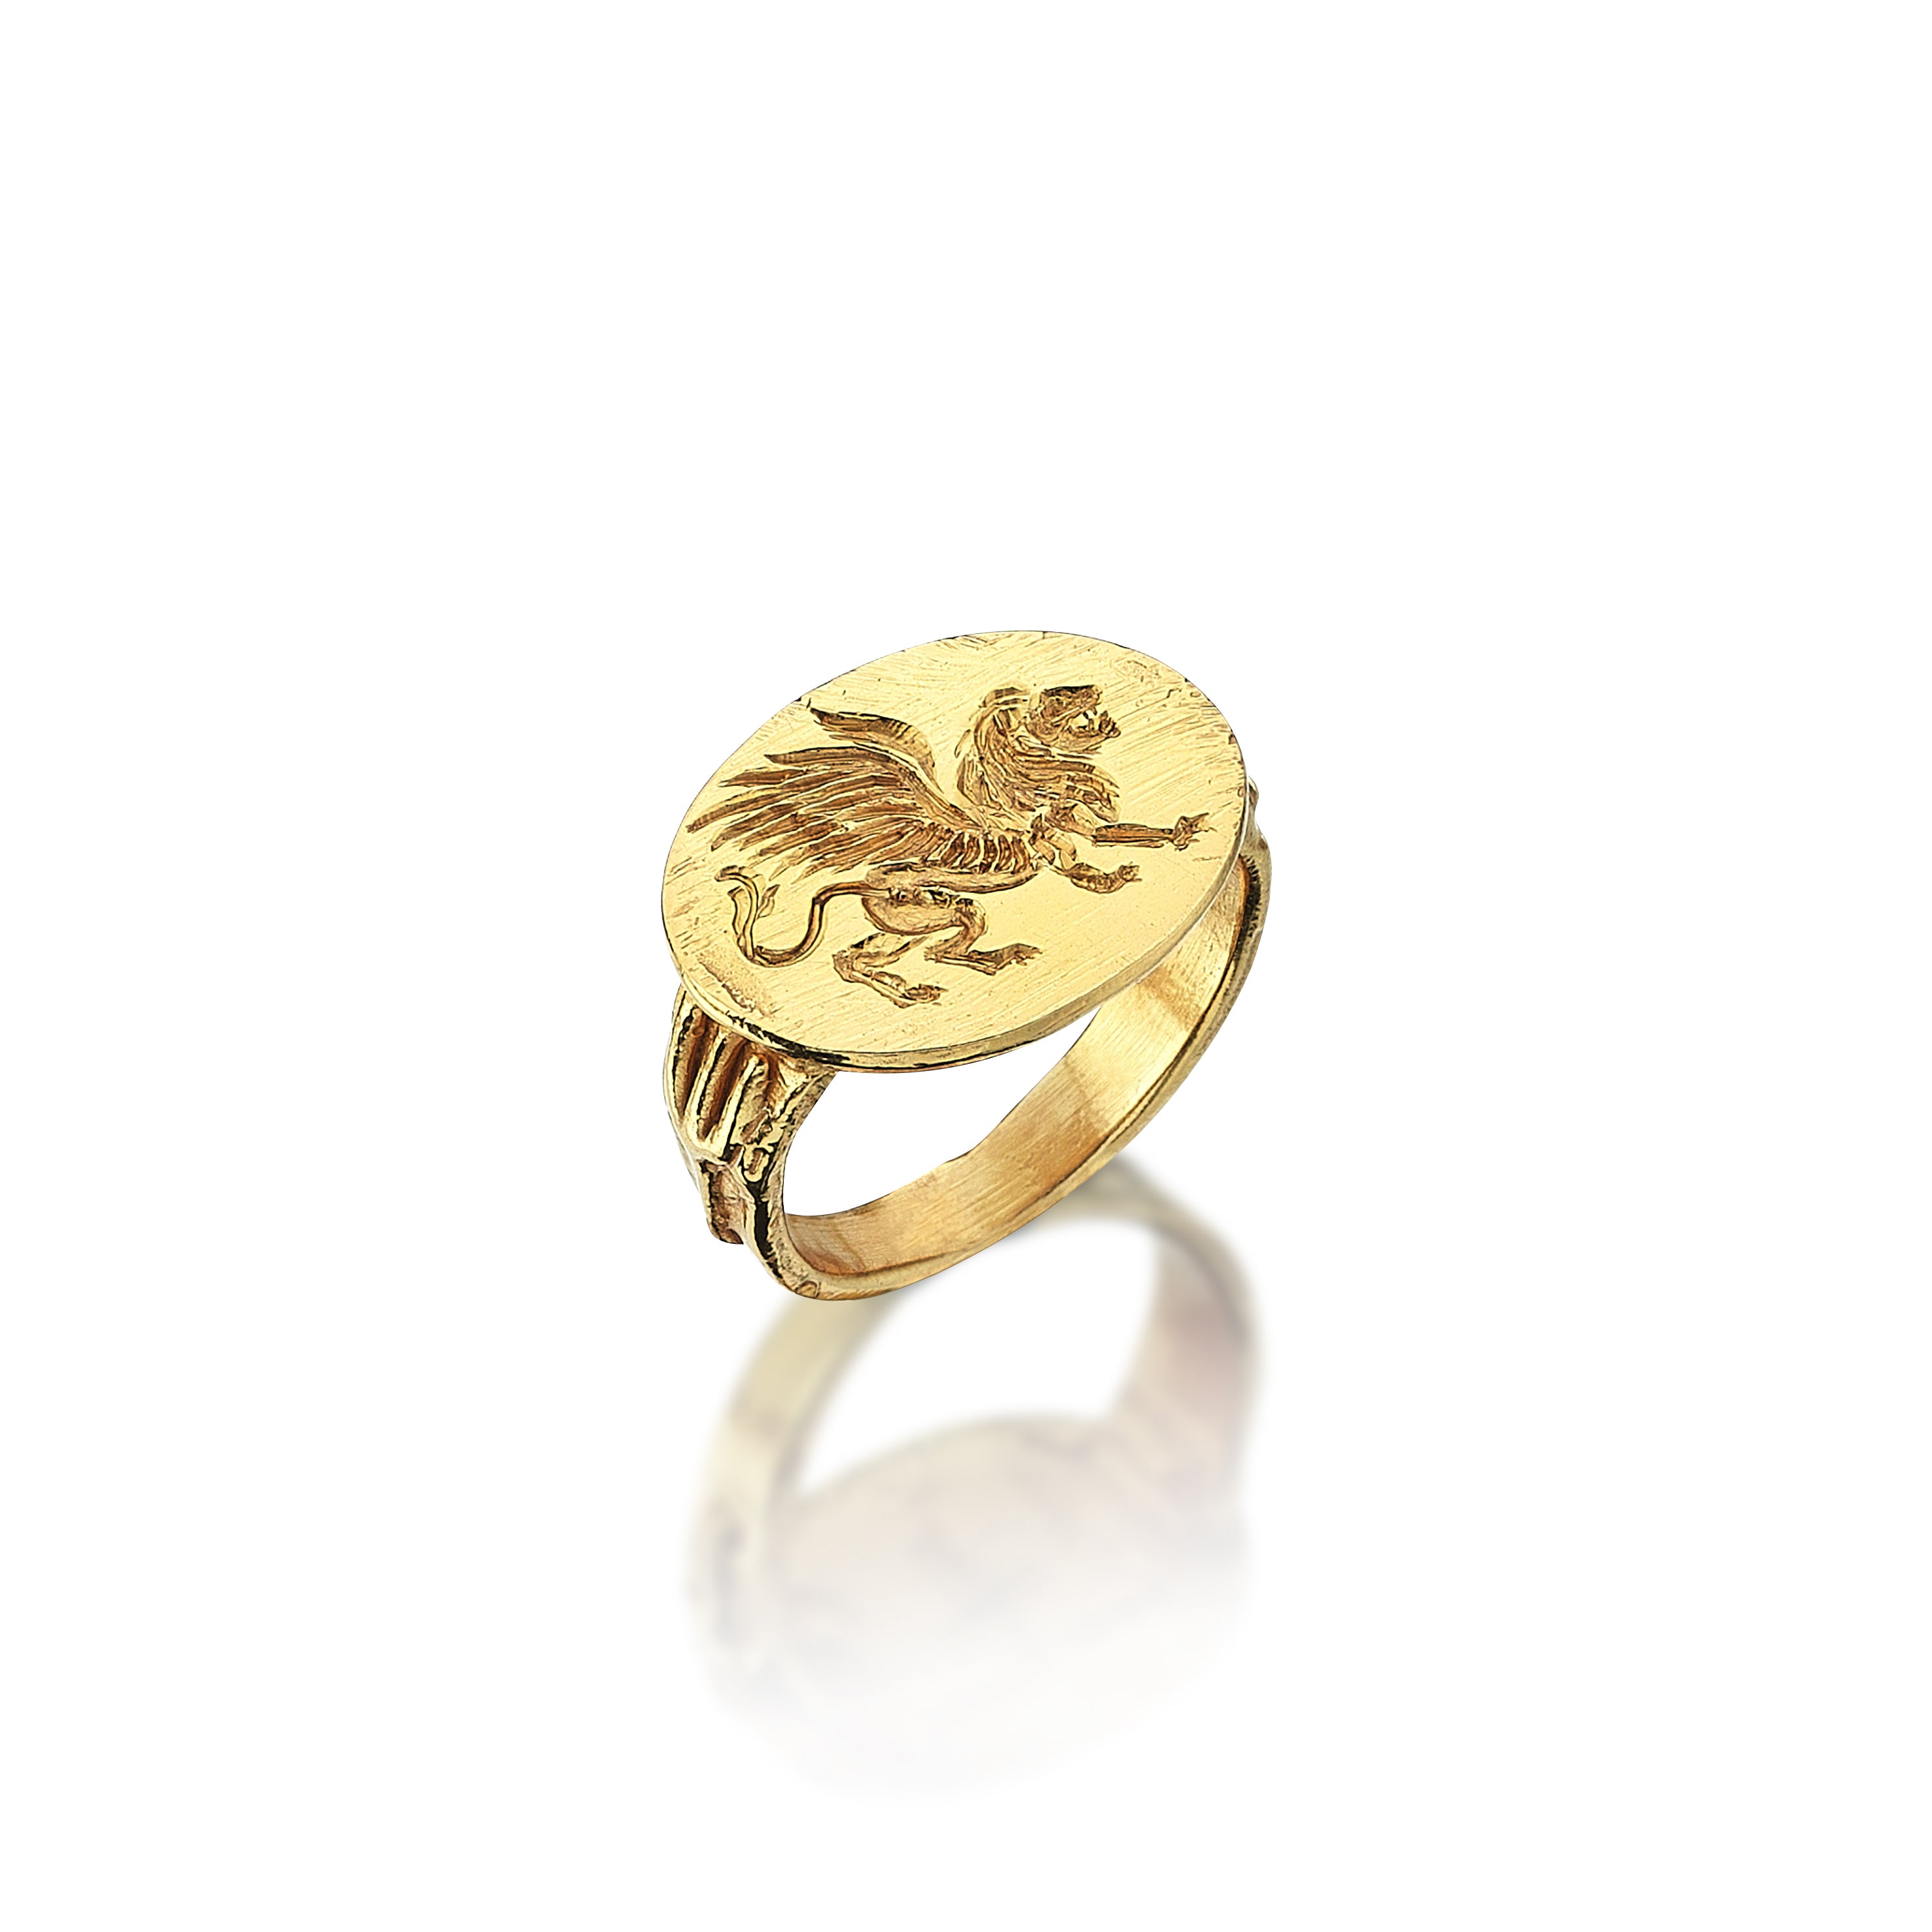 The GRIFFIN Ring